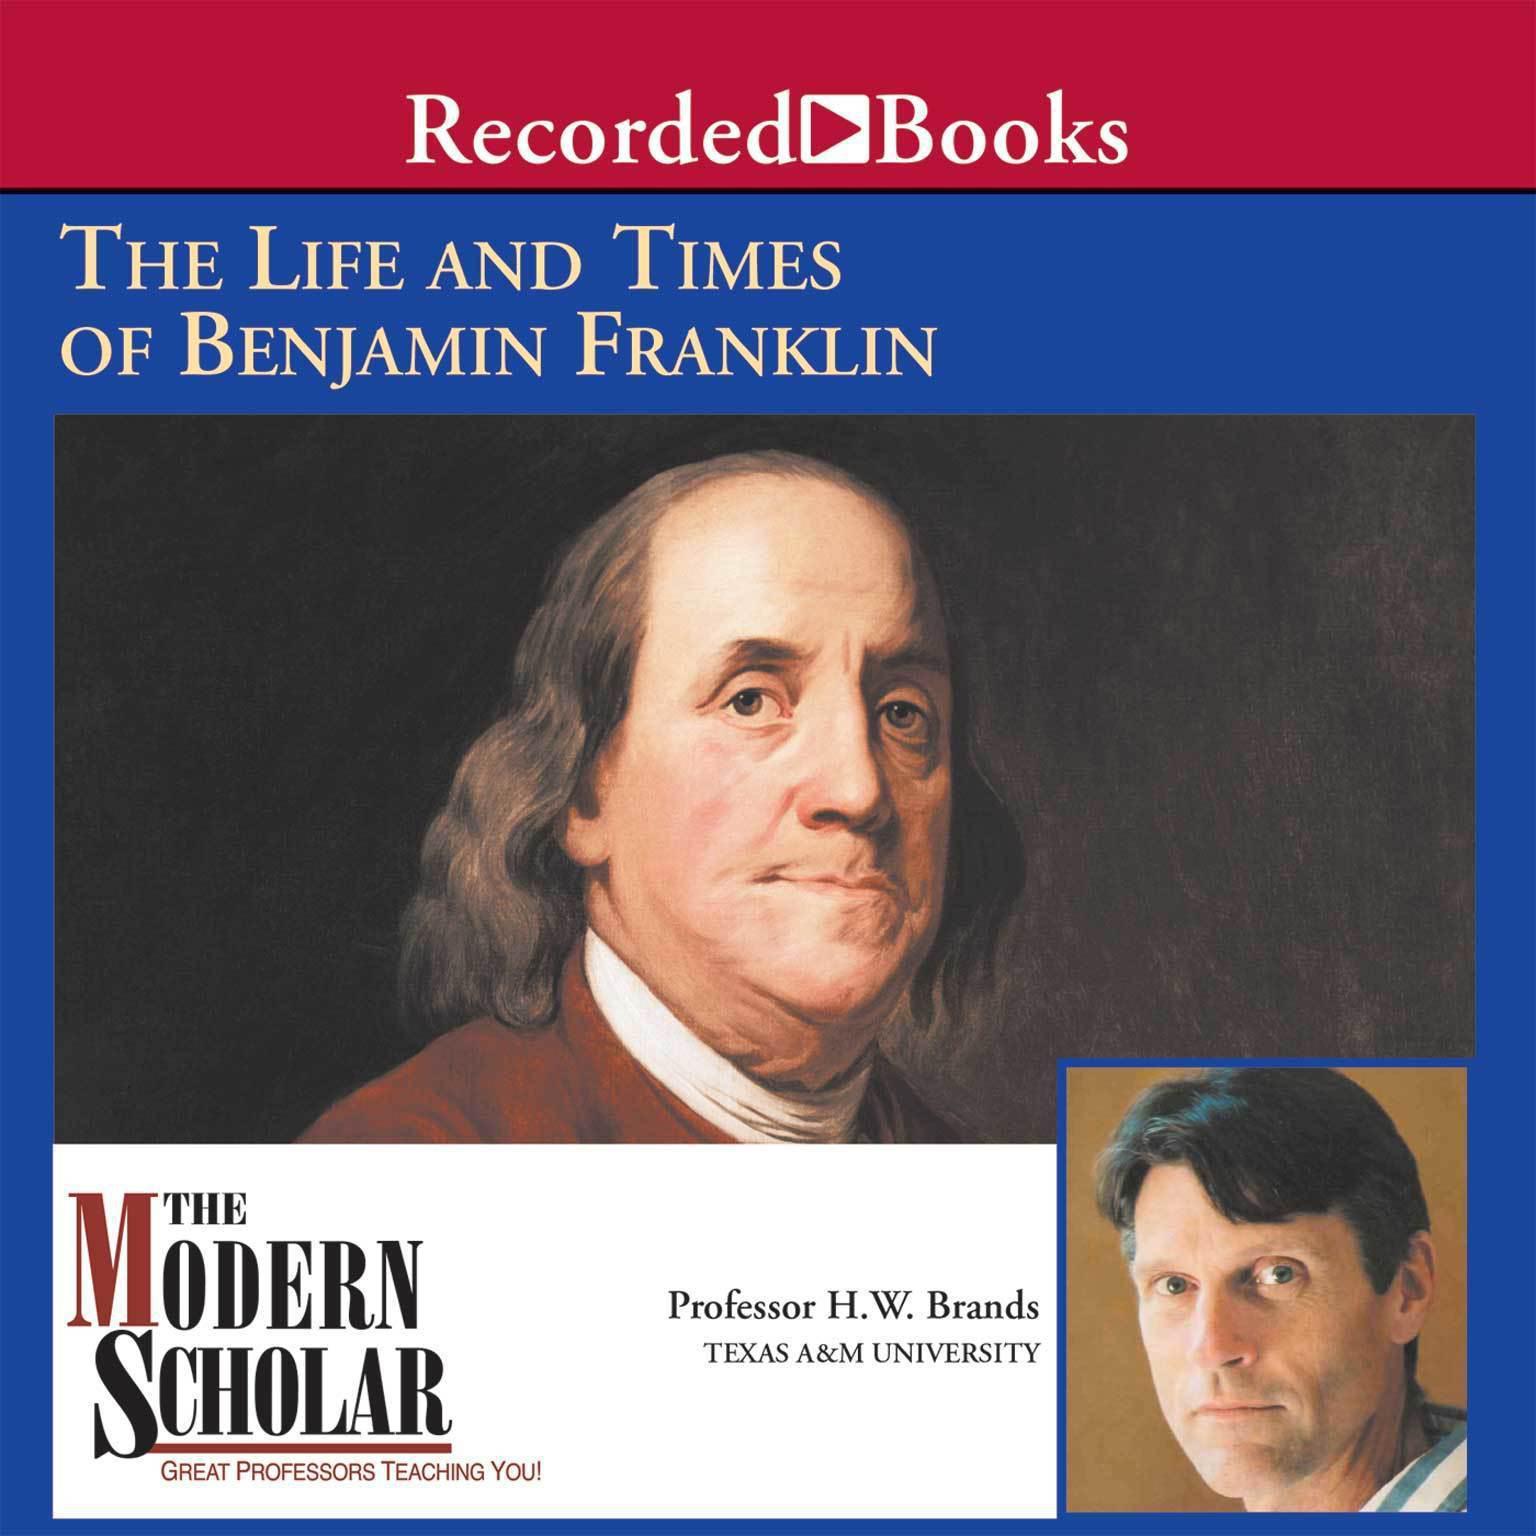 The Life and Times of Benjamin Franklin: The Life and Times of Benjamin Franklin Audiobook, by H. W. Brands